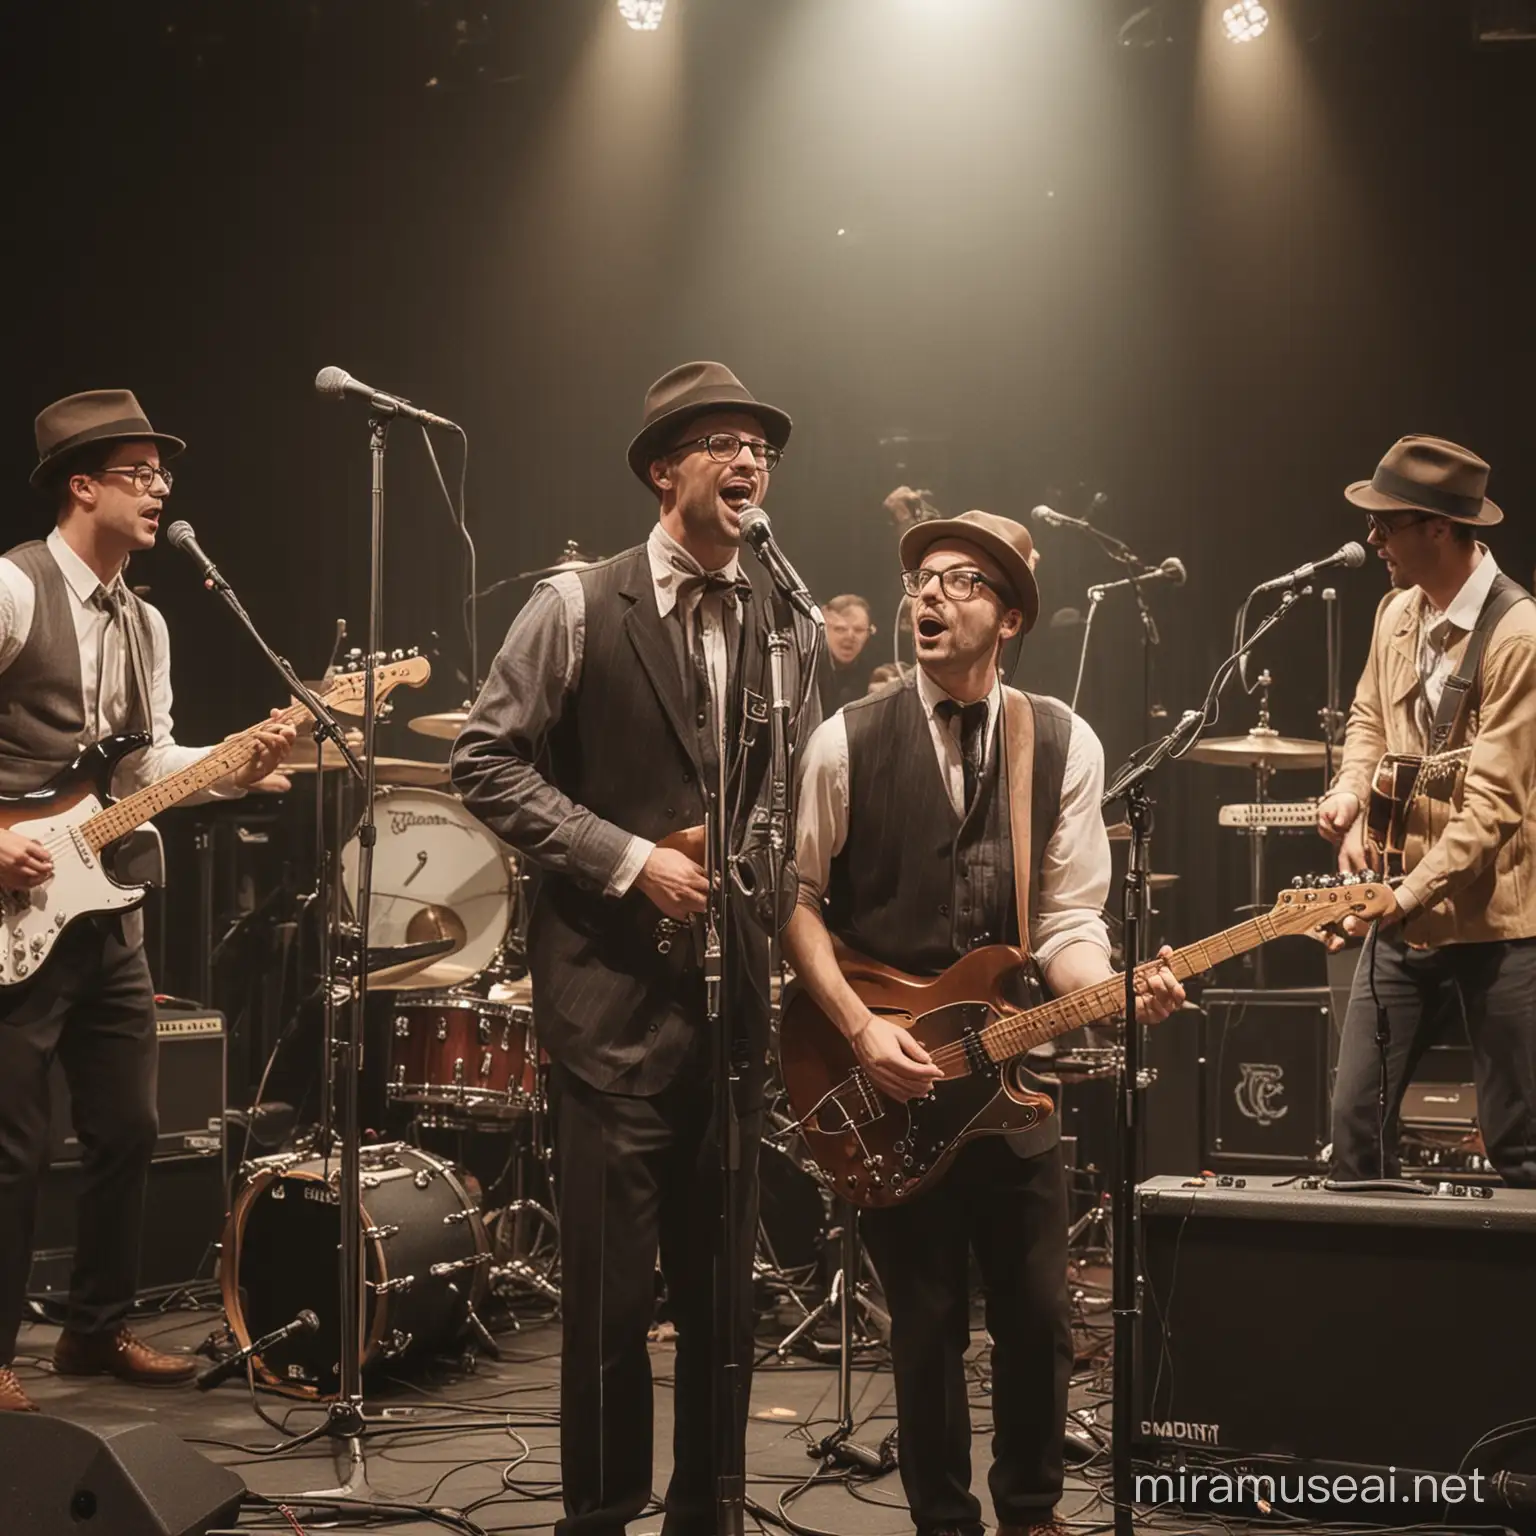 1 man sings using an old school microphone on stage, wearing glasses, wearing a fedora hat, 4 other people playing musical instruments guitar, drums, bass, piano surround the vocalist.